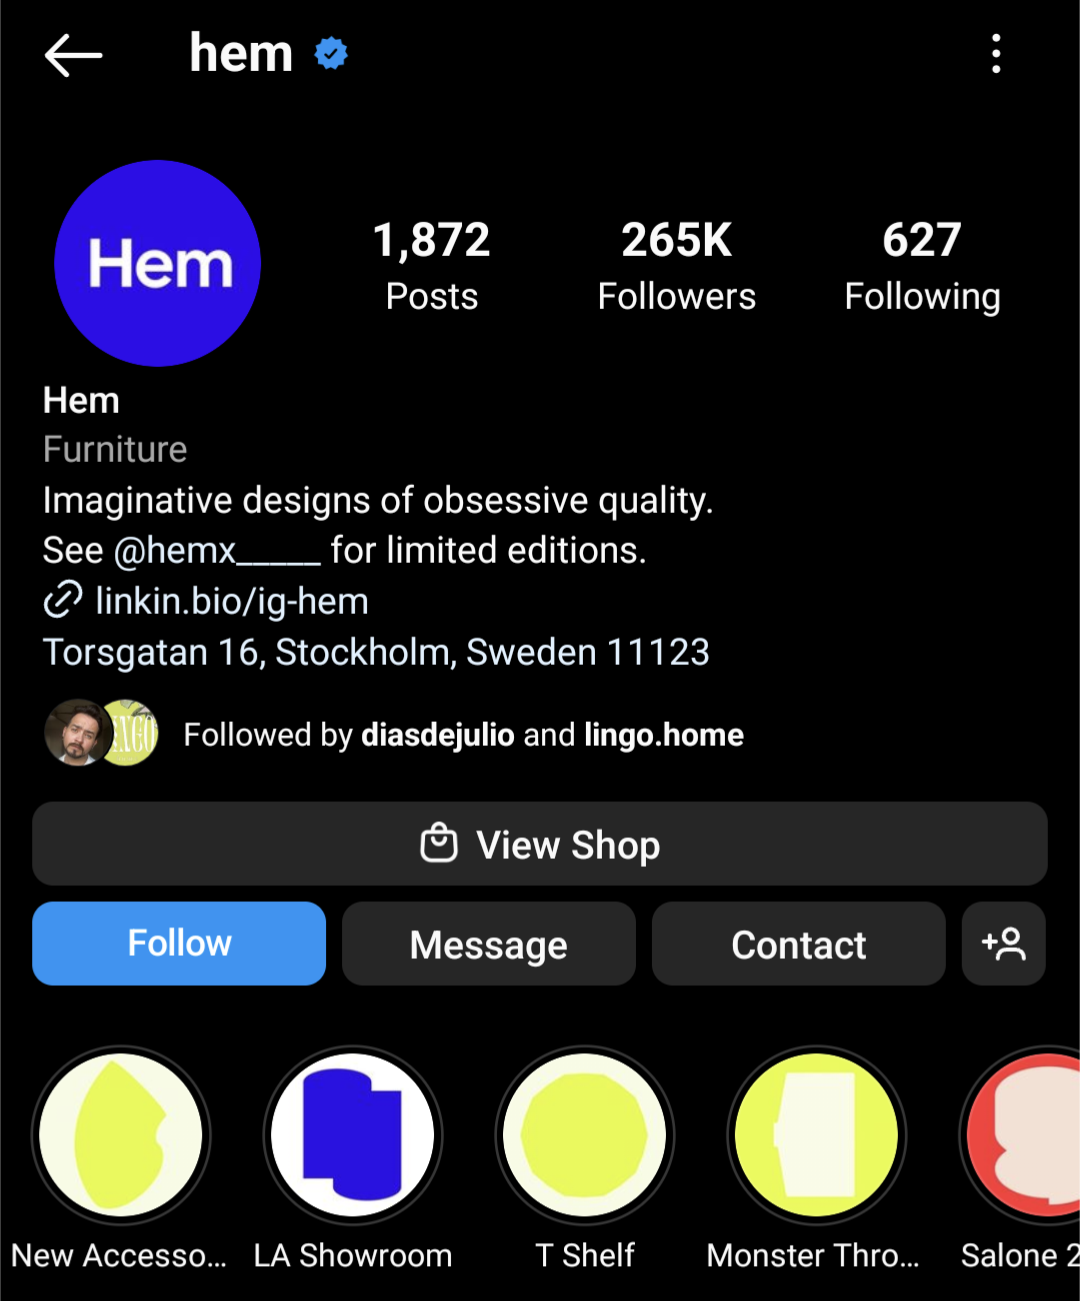 Hem promotes its dedication to limited edition products in its Instagram bio